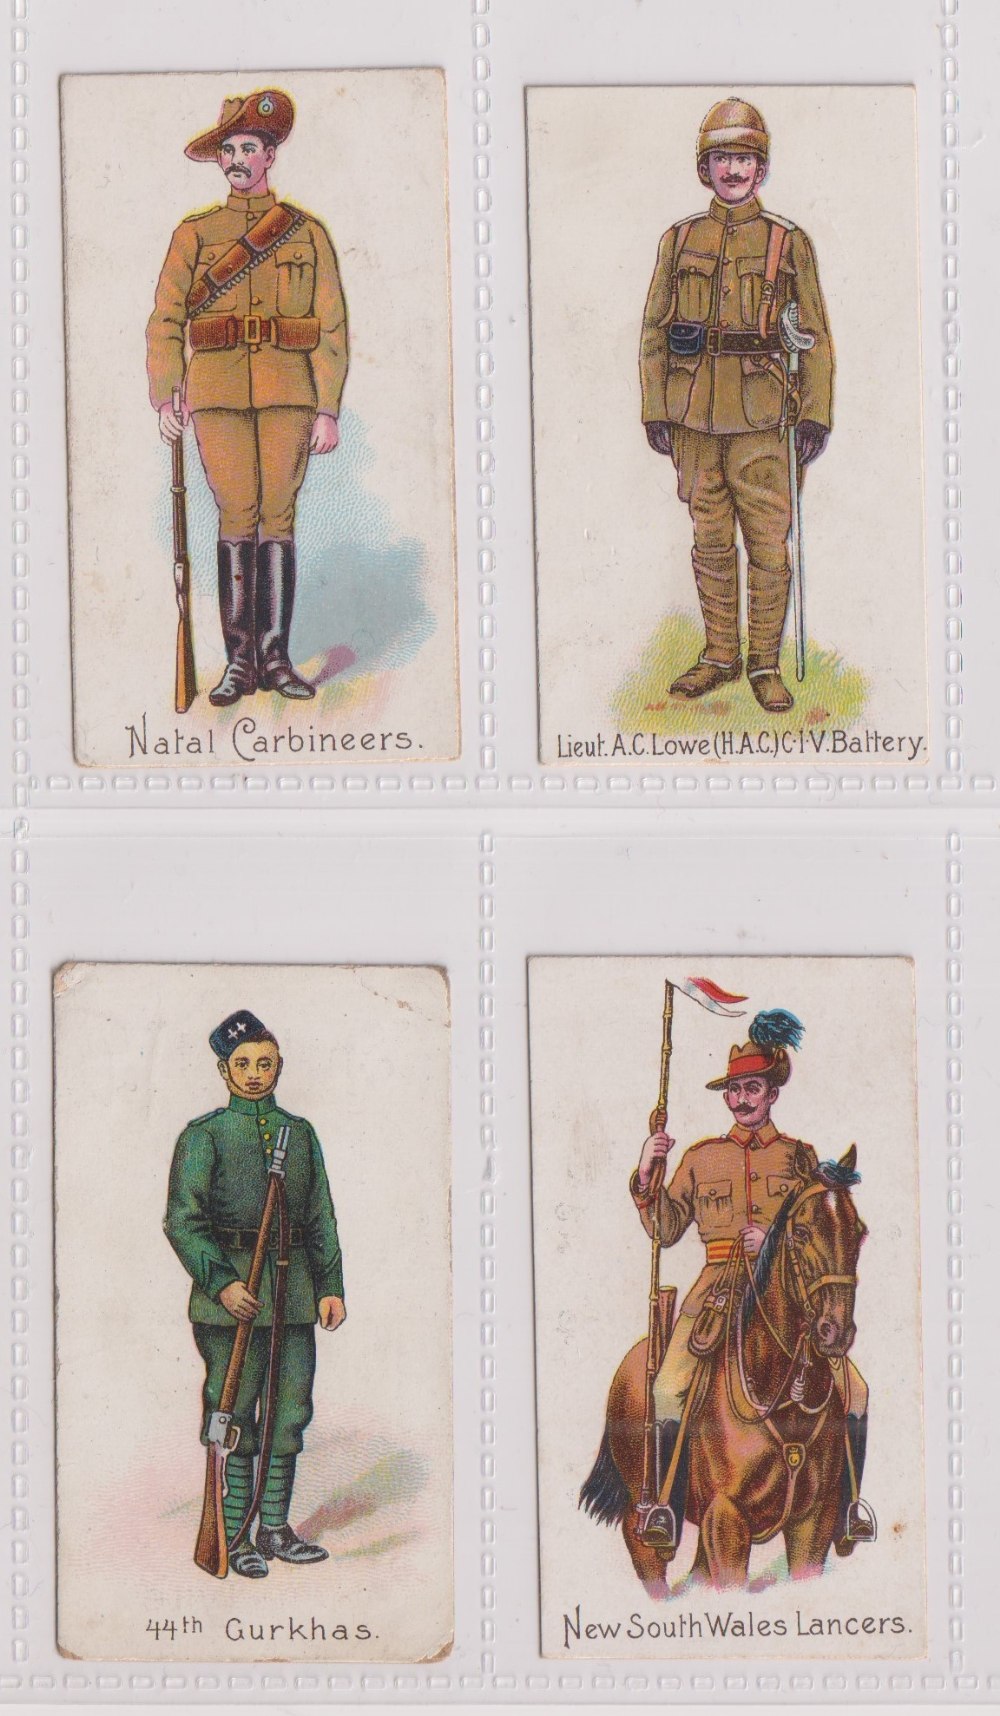 Cigarette cards, Harvey & Davy, Colonial Troops, four cards, Natal Carbineers (gd), Lieut. A.C. Lowe